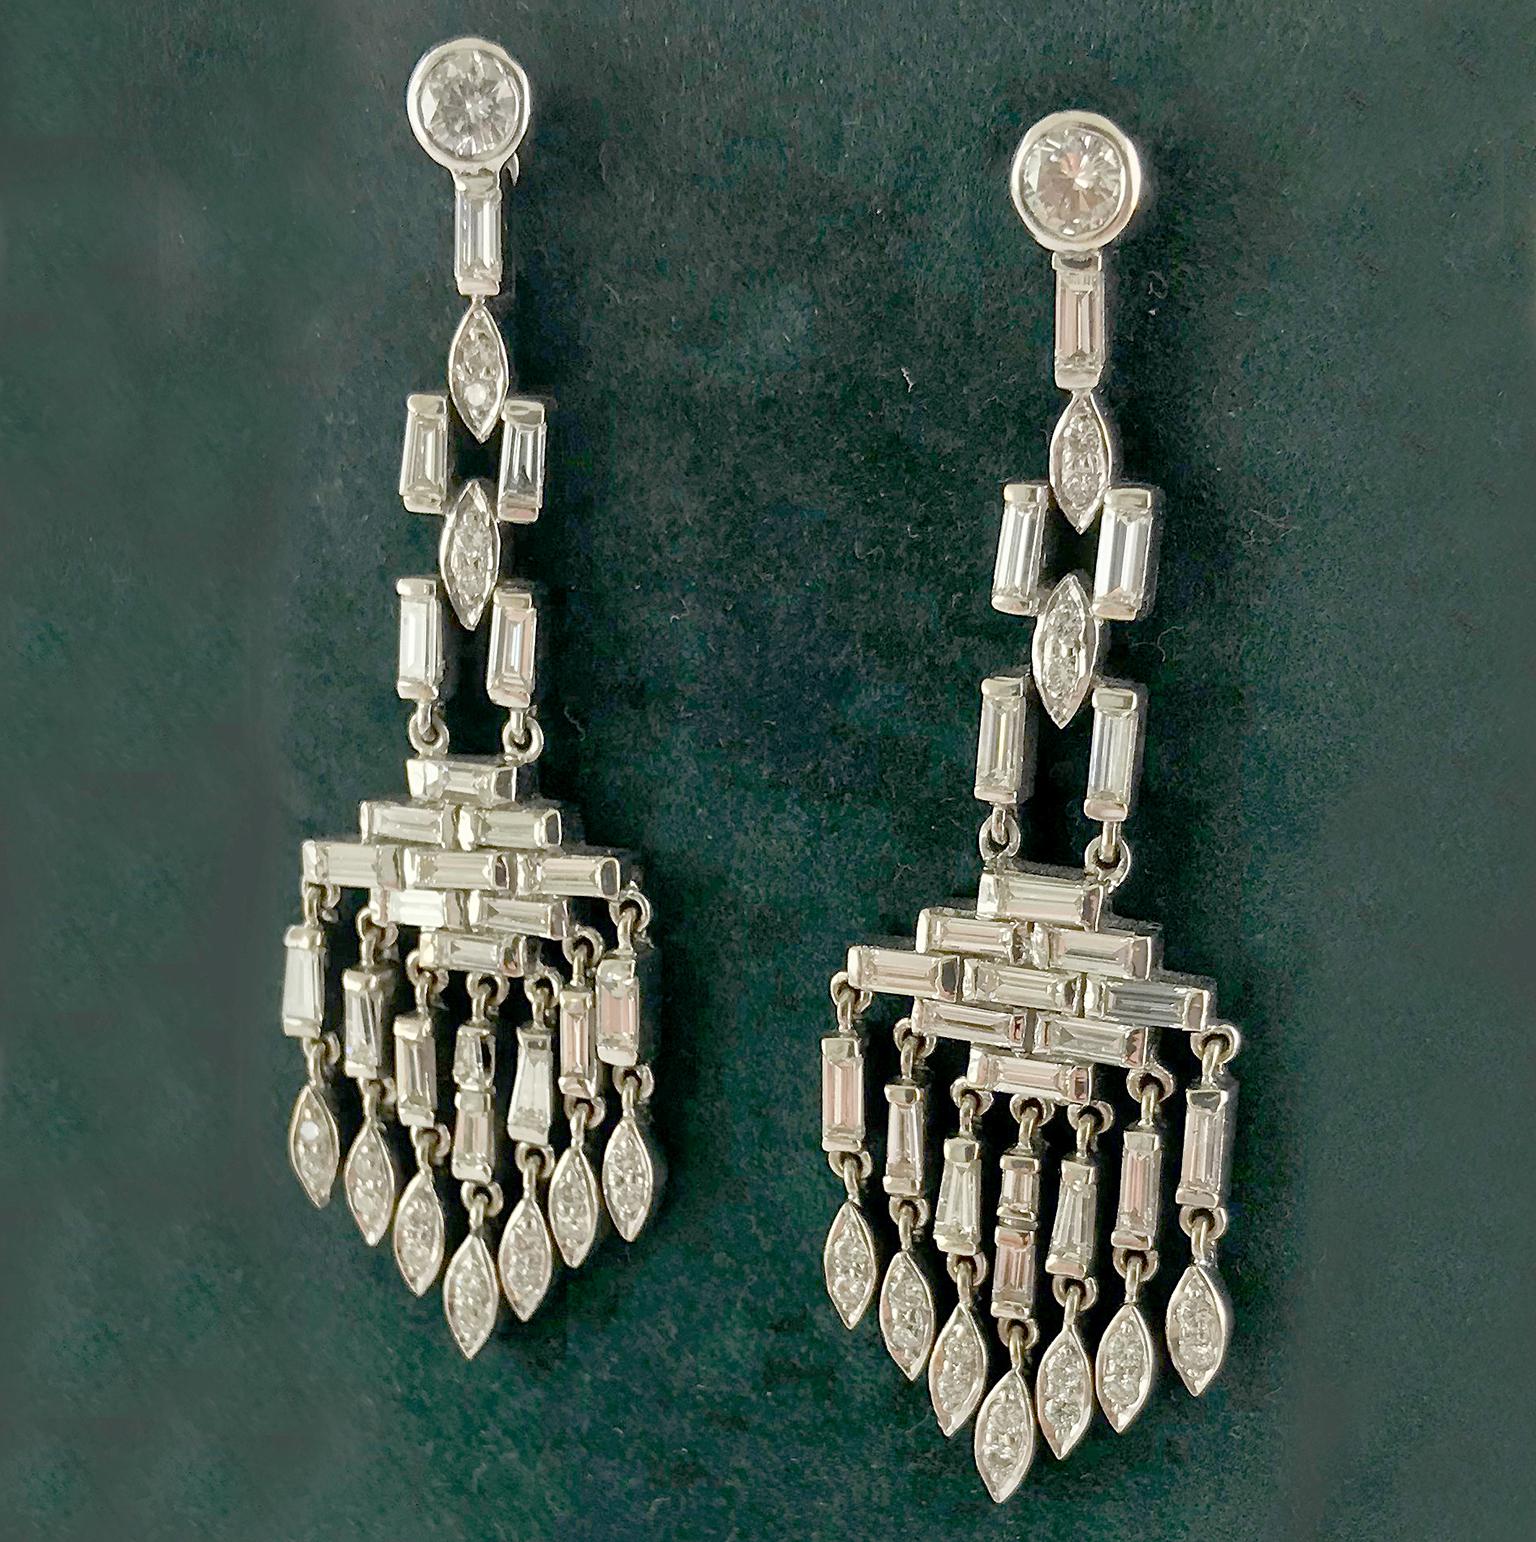 A pair of white diamond chandelier earrings from the 1930’s in the Art Deco style.

Baguette and marquise shaped white diamonds set in platinum and 18ct yellow gold in a tasselled chandelier design.

Total Diamond weight (approx.) 5.70cts, F/G/H